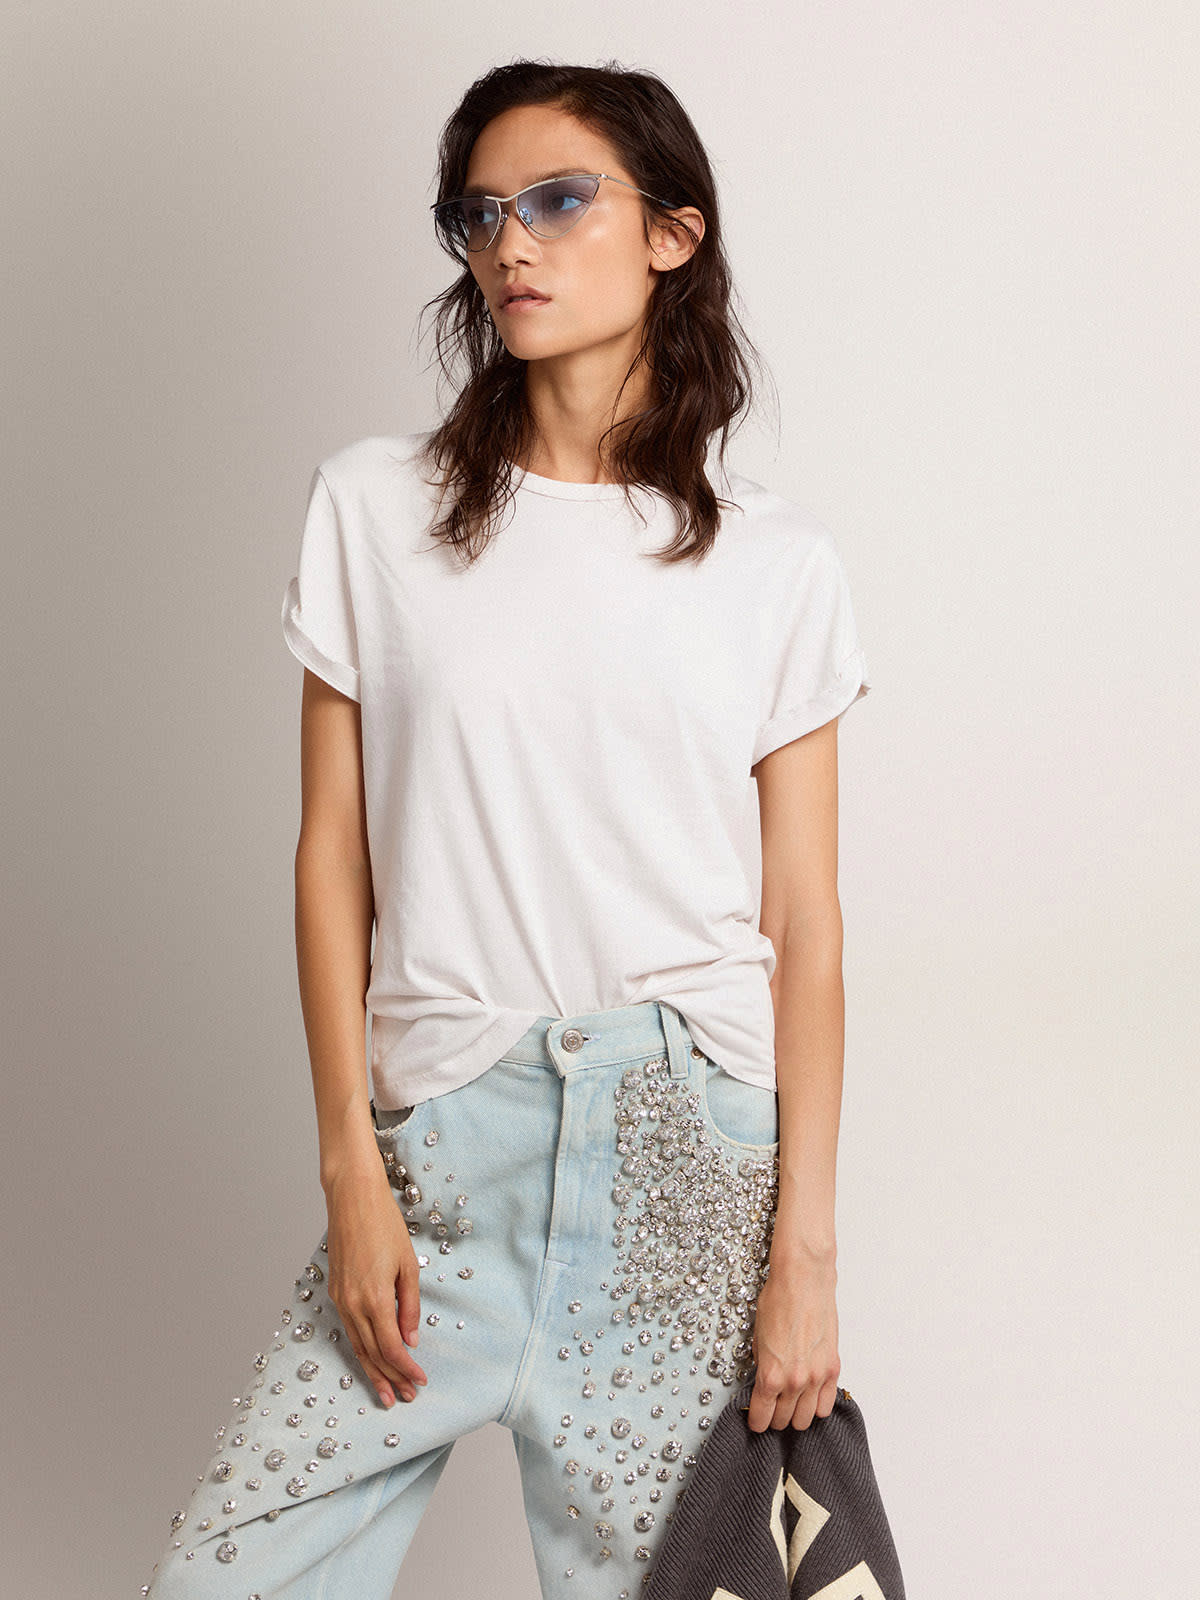 Golden Goose - Women's white T-shirt with distressed treatment in 